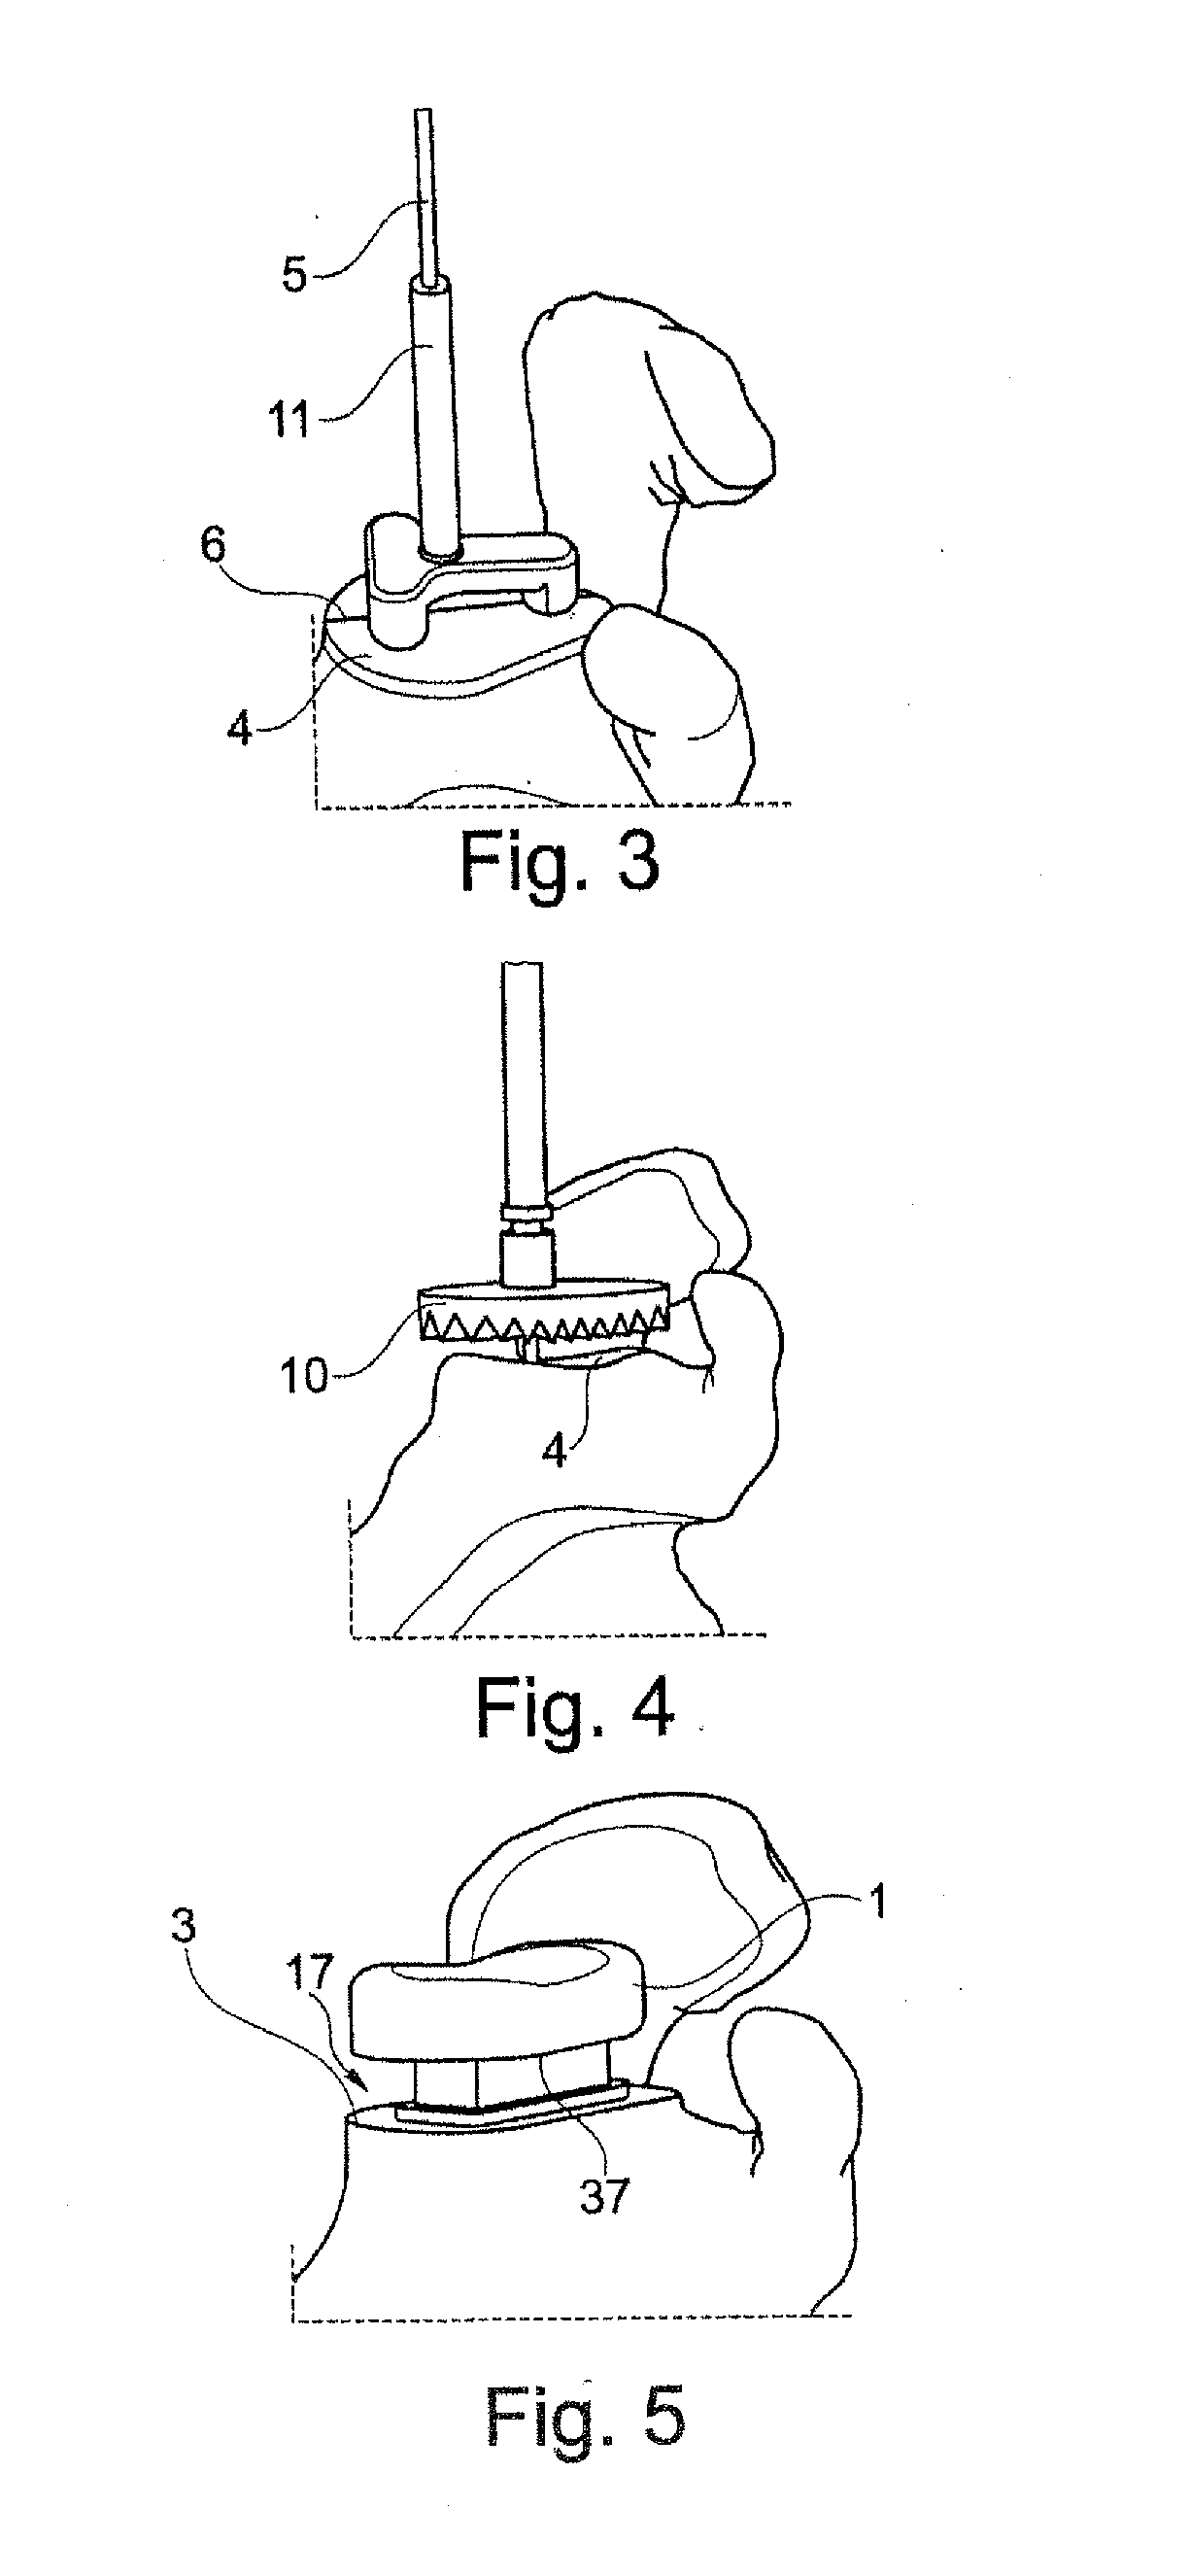 Allogenic Articular Cavity Prosthesis and Method for Implanting the Same